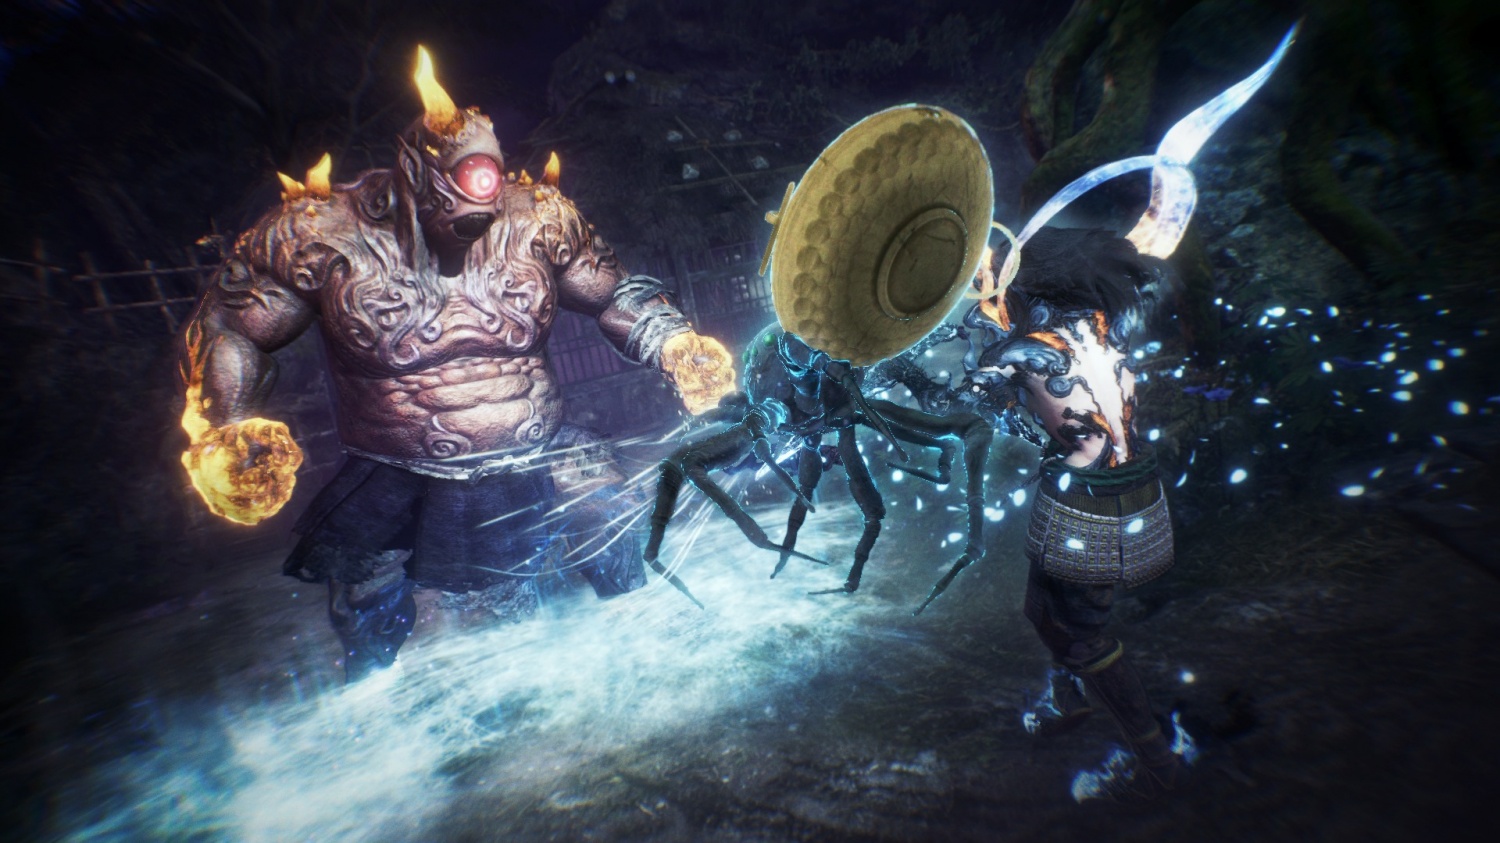 Nioh 2 Guide: The Best Tips to Survive Much Longer